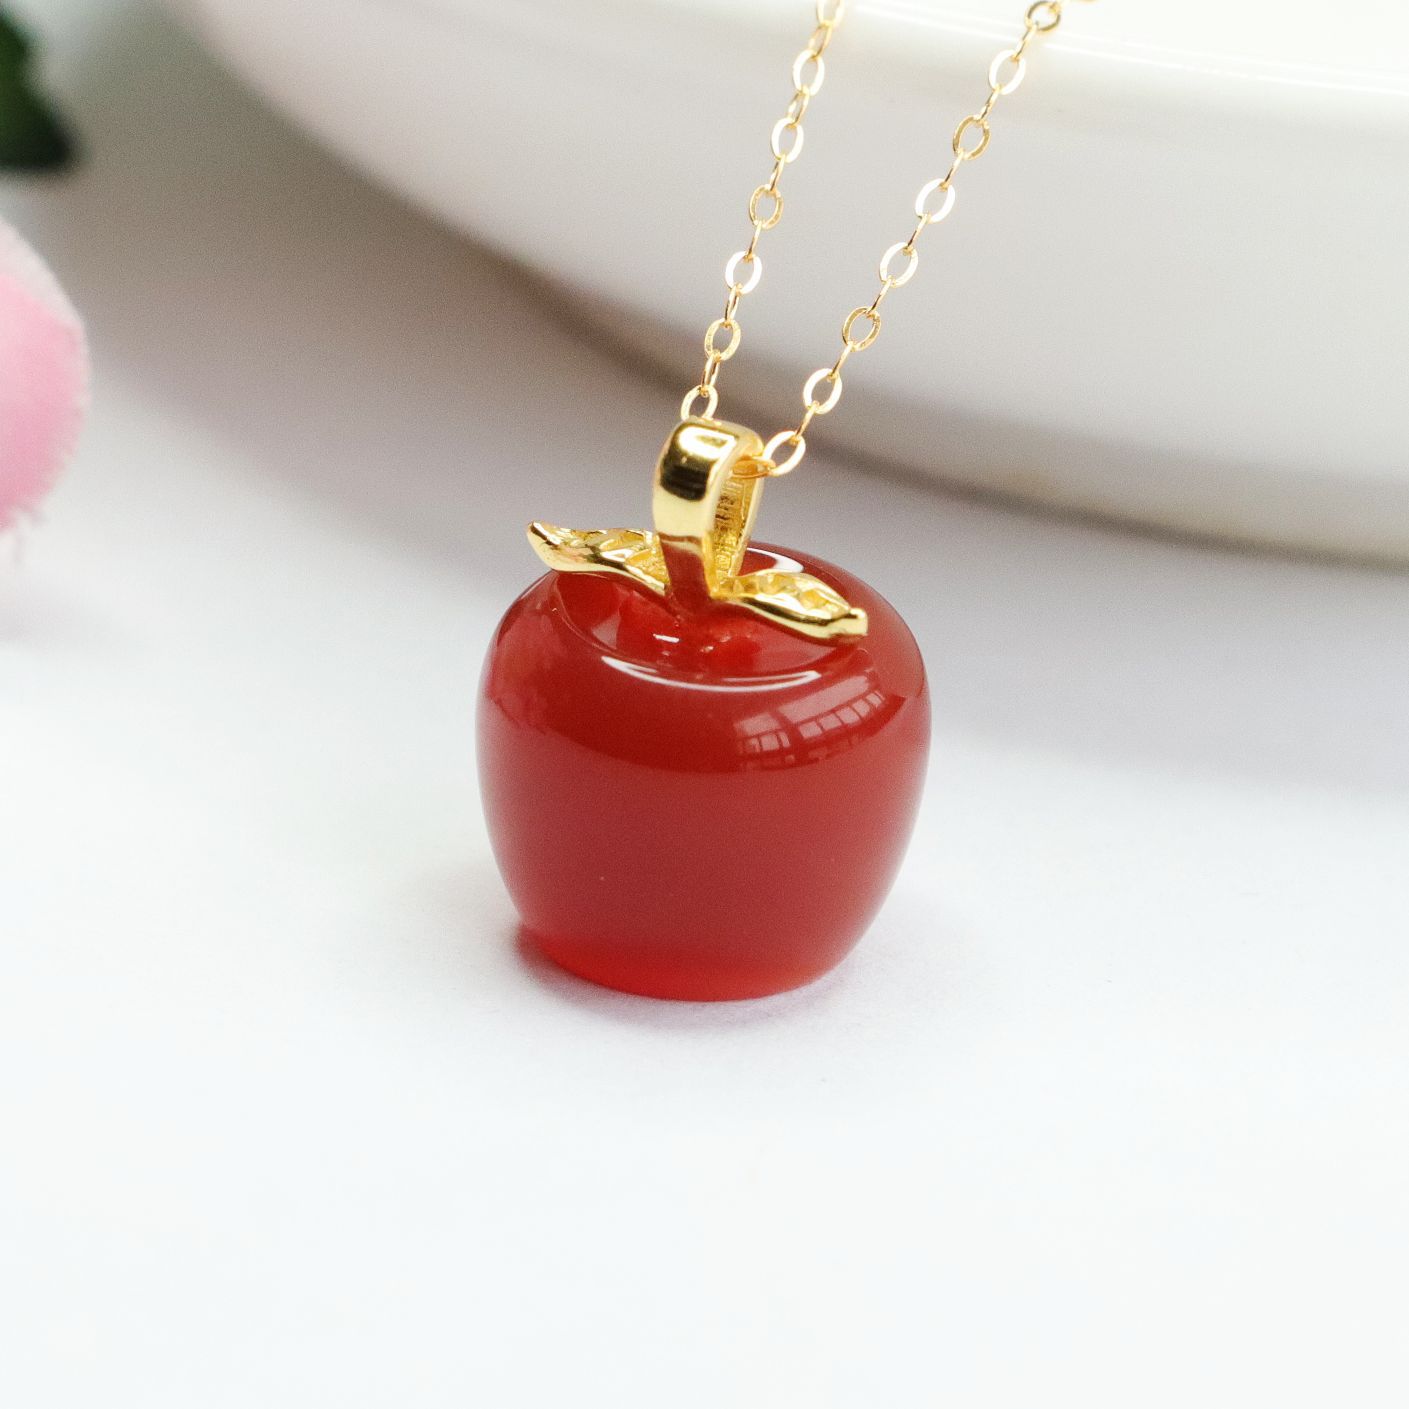 Fortune's Favor: Sterling Silver Necklace with Natural Red Agate Apple Pendant